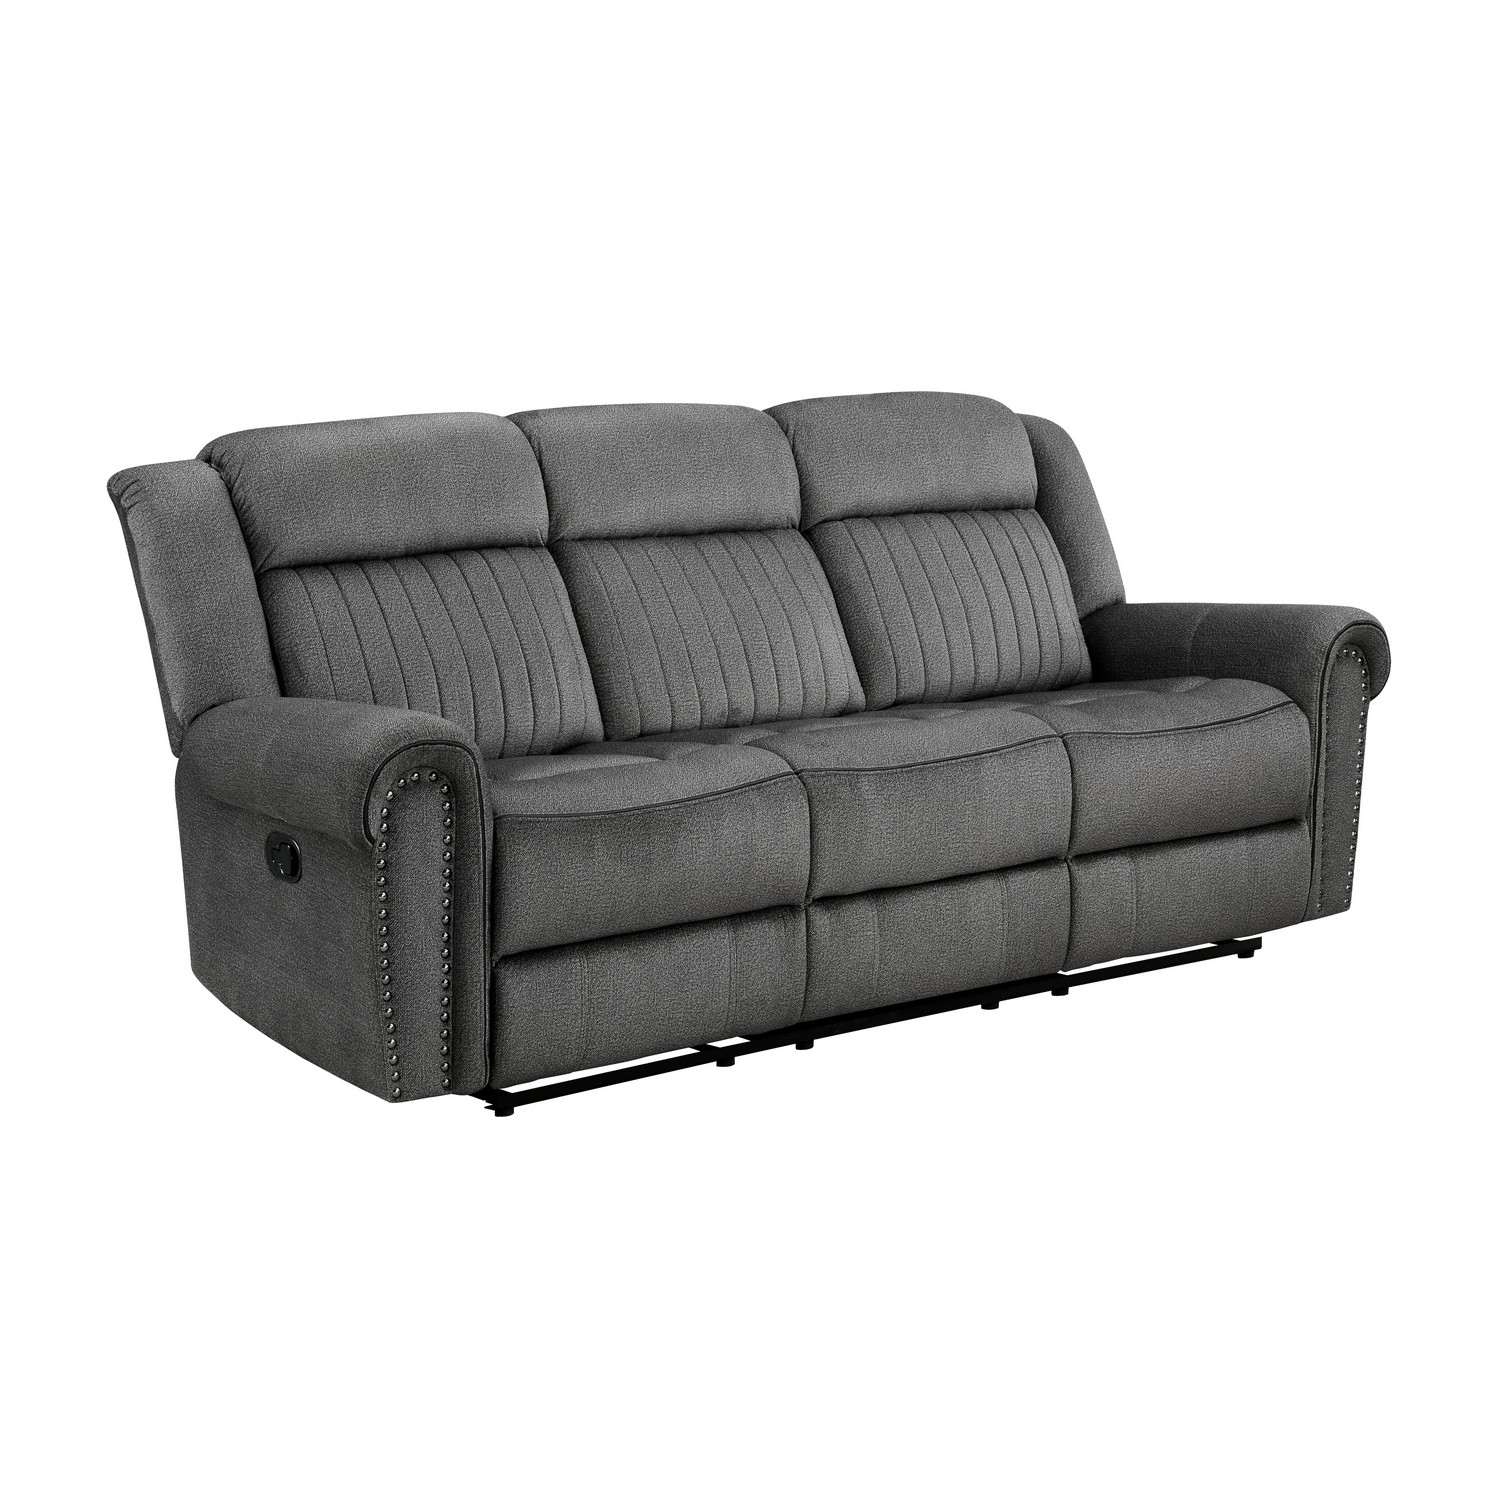 Homelegance Brennen Double Reclining Sofa - Charcoal